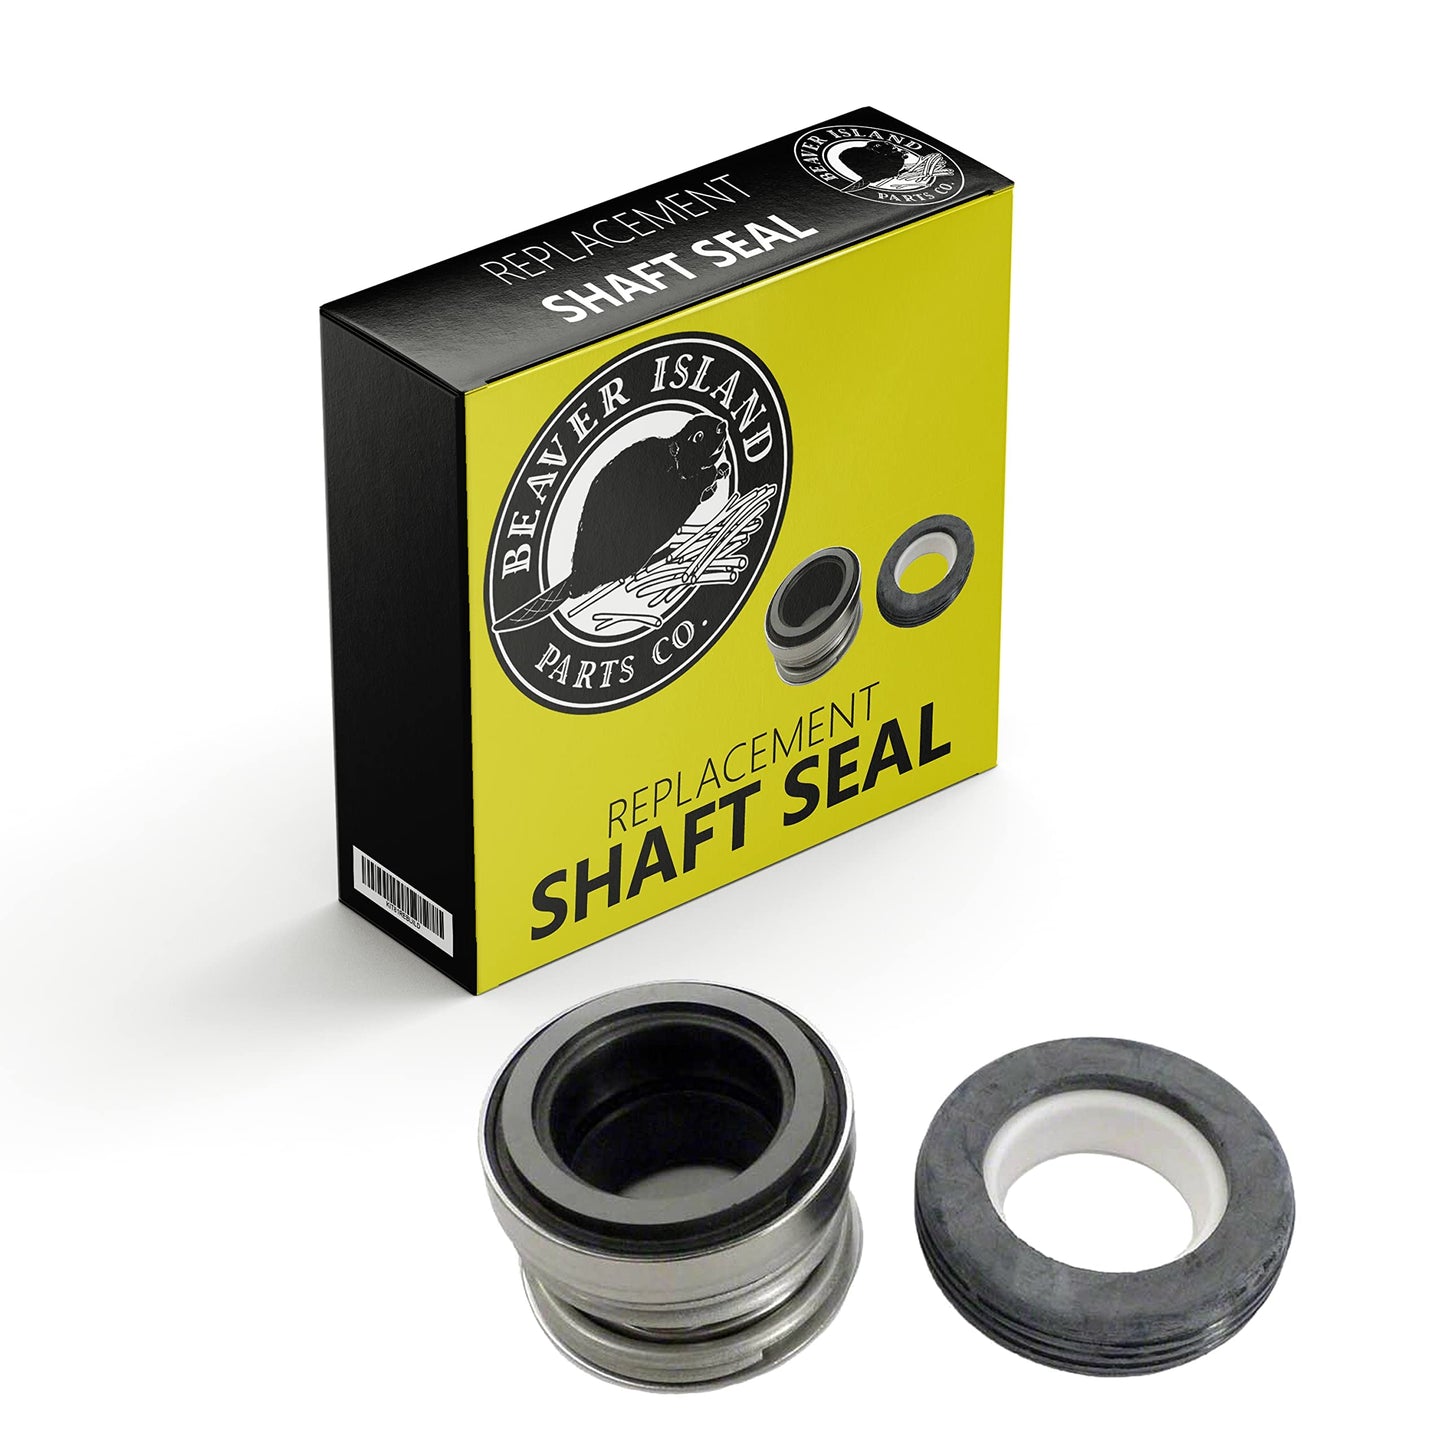 Shaft Seal Replacement for Hayward Max-Flo Series SPX1600Z2 Pump Motor Mechanical Seal